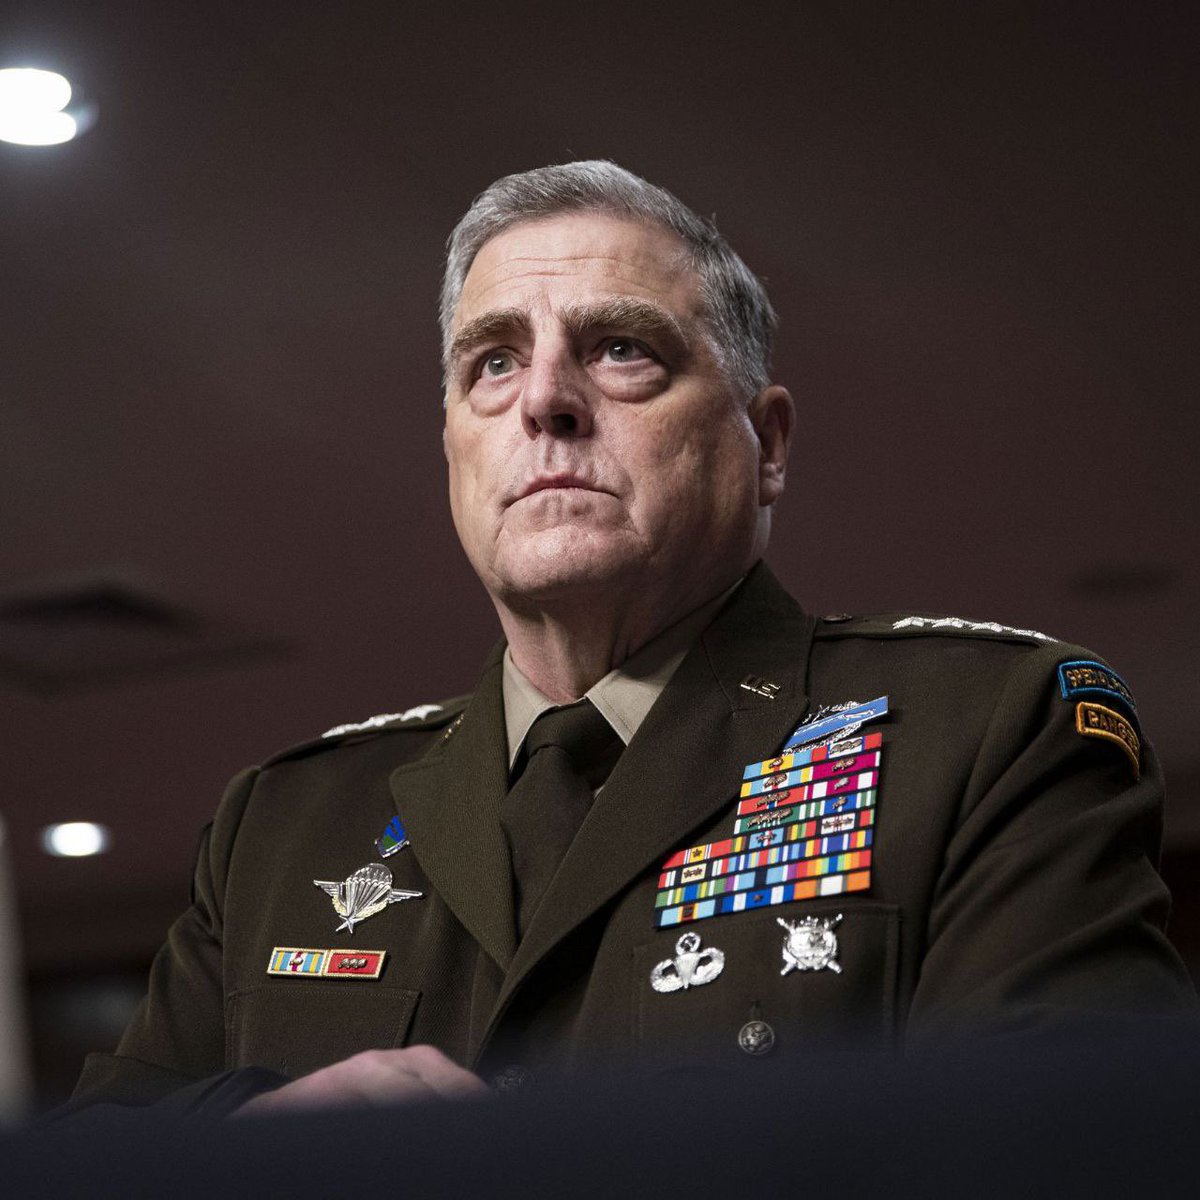 Chairman of the US Joint Chiefs of Staff, General Mark Milley, during a speech to graduates of the National Defense University, said that there are now at least three superpowers in the world - the United States, Russia and China.

According to Milley, in the next few decades the…